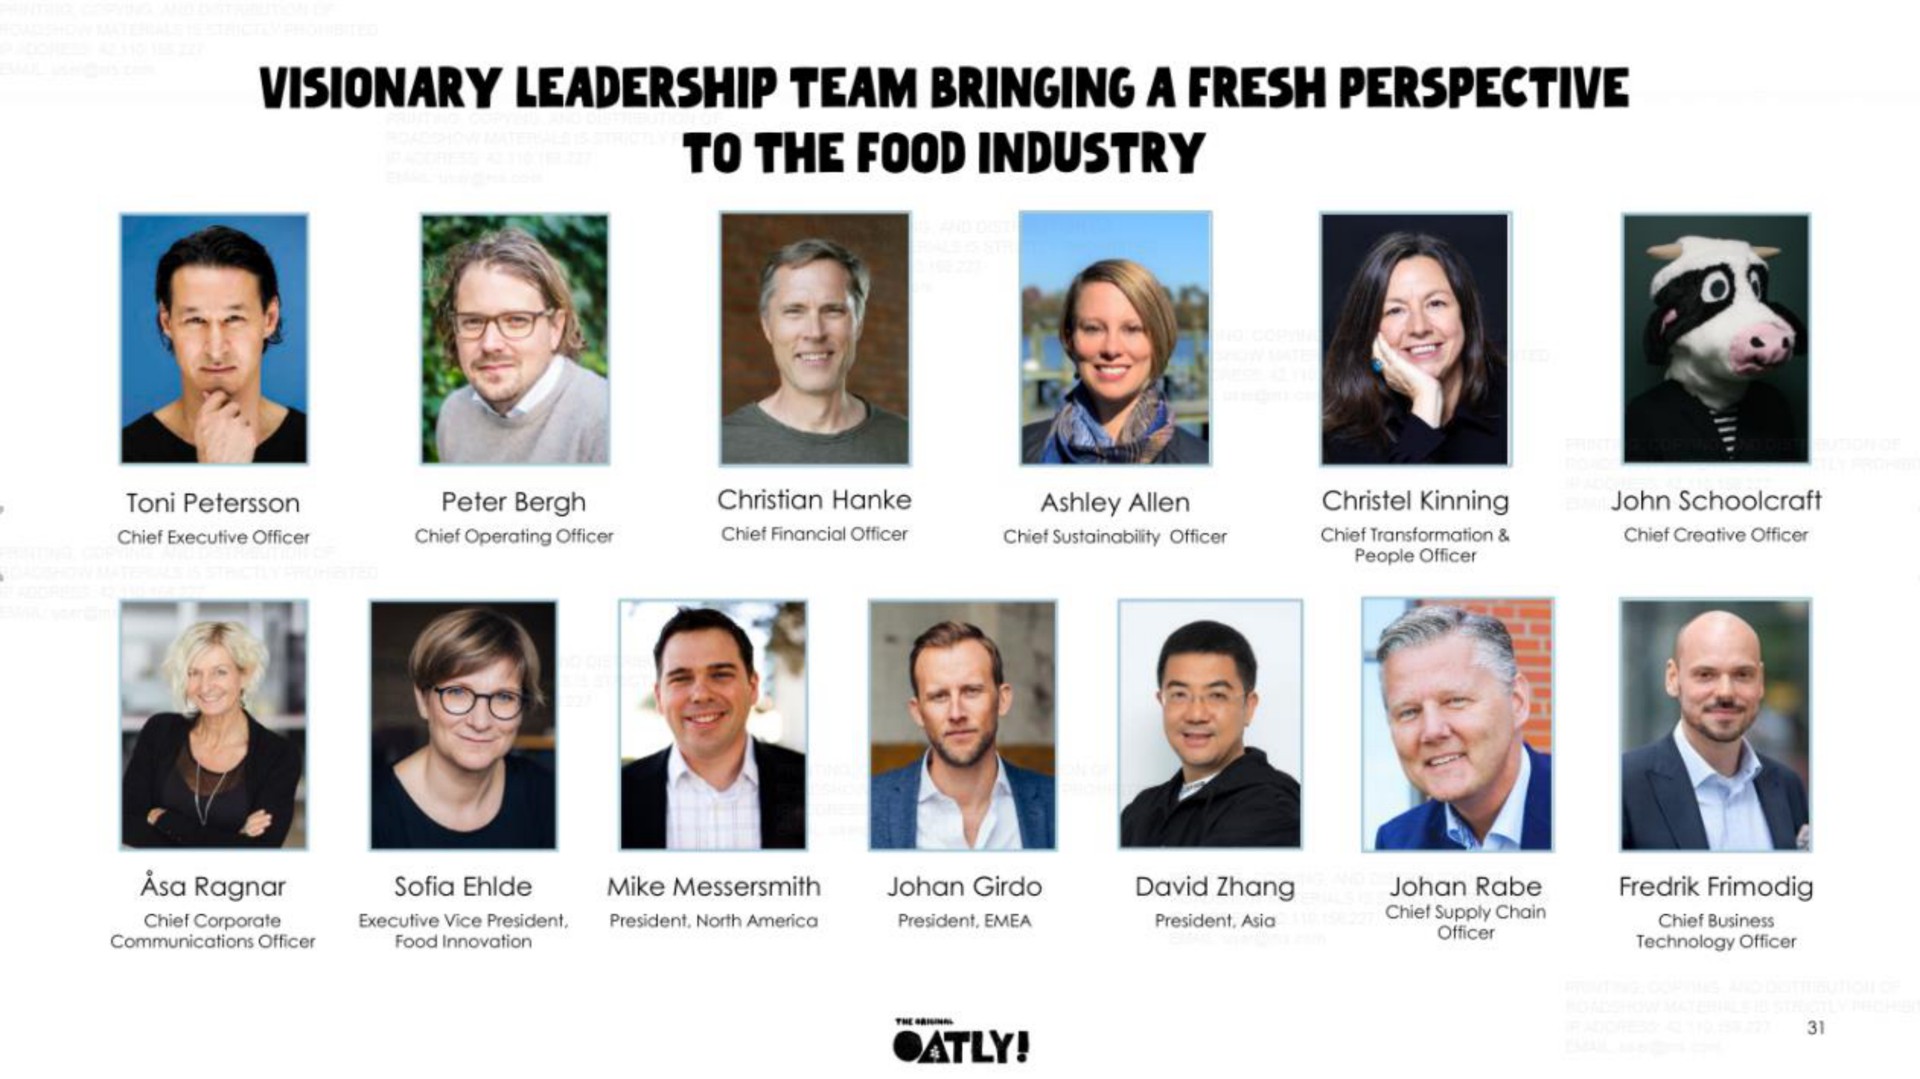 visionary leadership team bringing a fresh perspective to the food industry ret a | Oatly